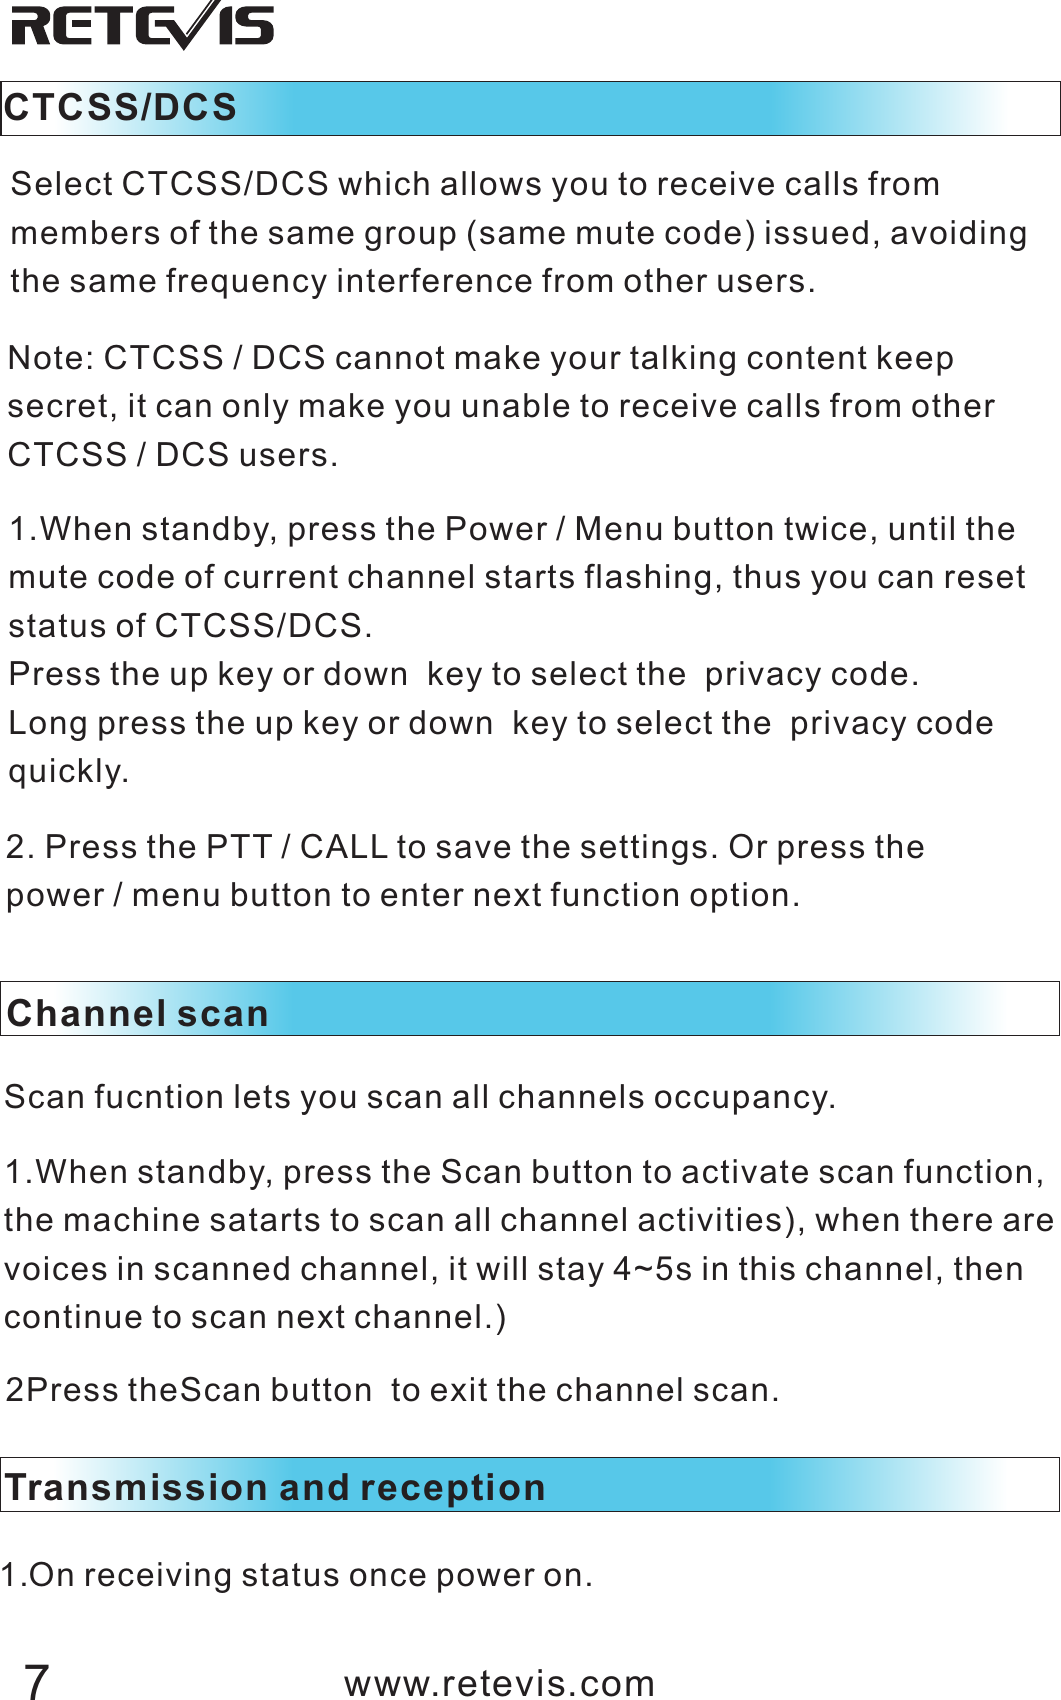 Note: CTCSS / DCS cannot make your talking content keep secret, it can only make you unable to receive calls from other CTCSS / DCS users.1.When standby, press the Power / Menu button twice, until the mute code of current channel starts flashing, thus you can reset status of CTCSS/DCS.Press the up key or down  key to select the  privacy code.Long press the up key or down  key to select the  privacy code quickly.2. Press the PTT / CALL to save the settings. Or press the power / menu button to enter next function option.CTCSS/DCS Select CTCSS/DCS which allows you to receive calls from members of the same group (same mute code) issued, avoiding the same frequency interference from other users.Channel scanScan fucntion lets you scan all channels occupancy.1.When standby, press the Scan button to activate scan function, the machine satarts to scan all channel activities), when there are voices in scanned channel, it will stay 4~5s in this channel, then continue to scan next channel.)2Press theScan   to exit the channel scan.button Transmission and reception 1.On receiving status once power on. www.retevis.com7